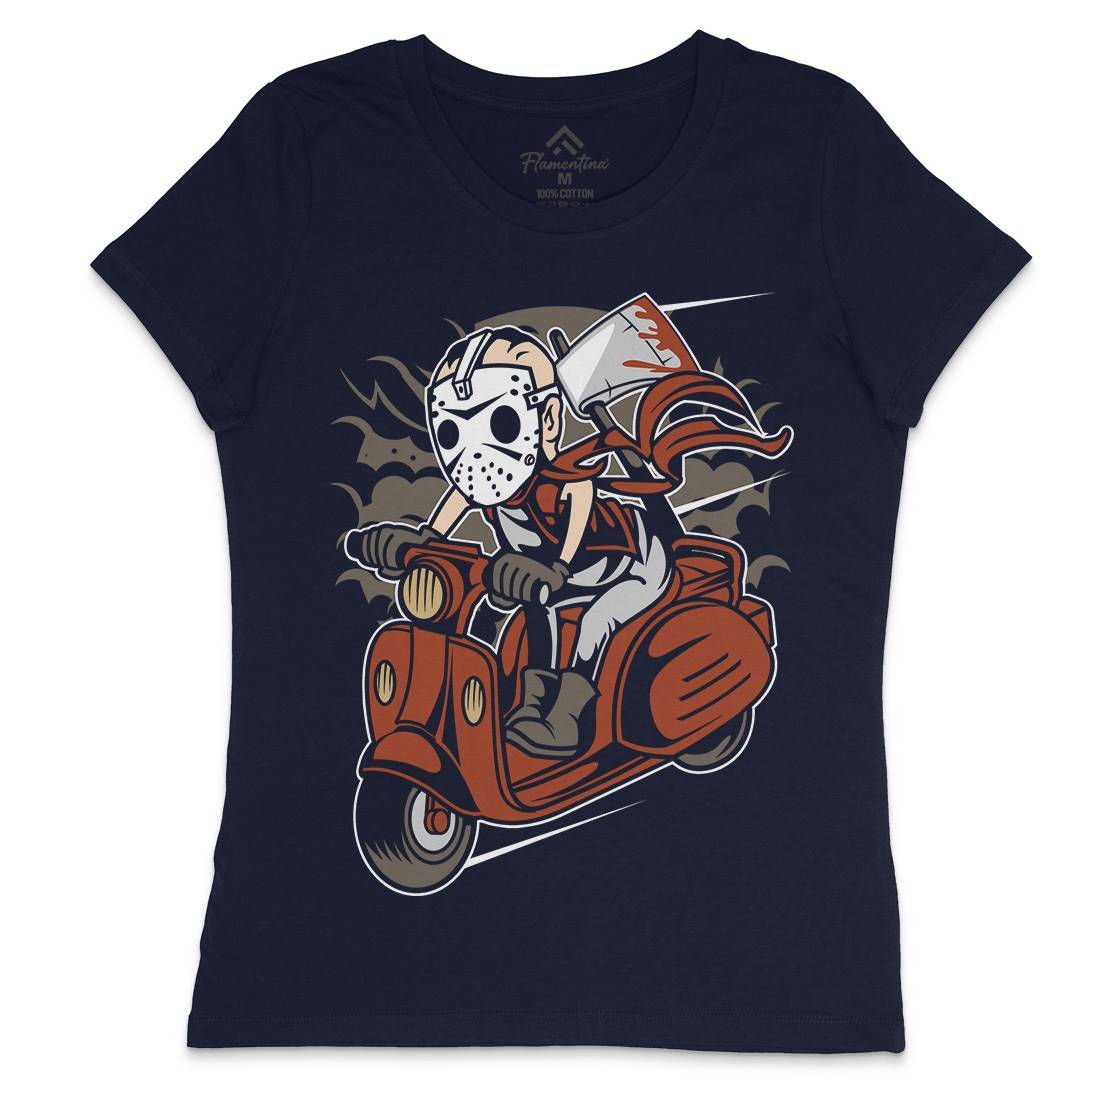 Slayer Scooter Womens Crew Neck T-Shirt Motorcycles C447